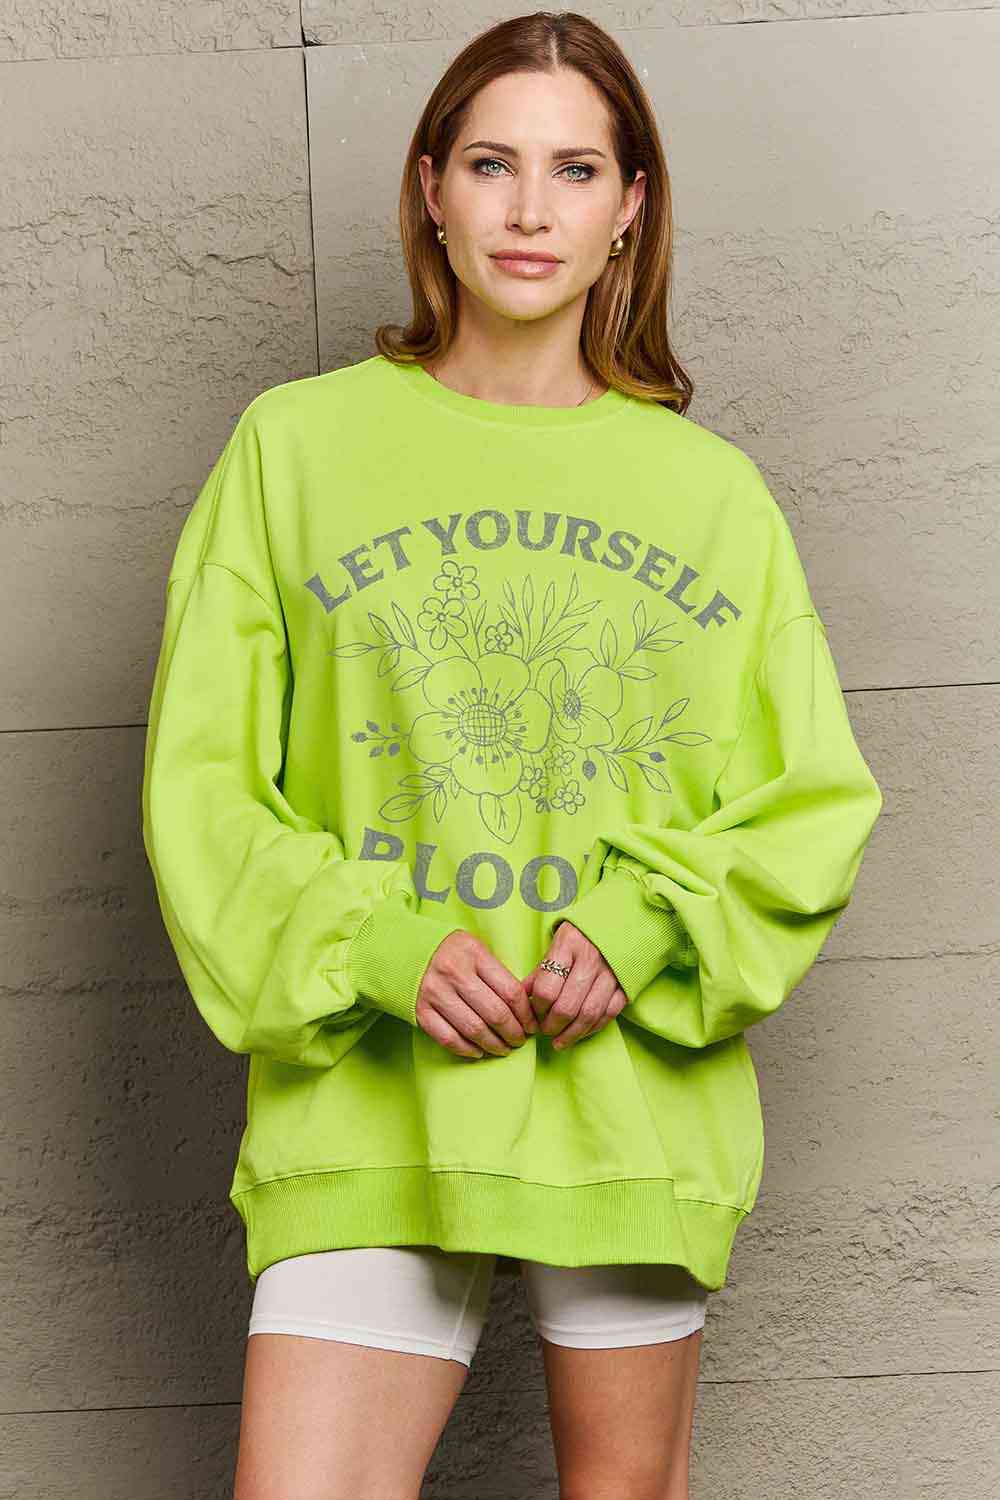 Simply Love Simply Love Full Size LET YOURSELF BLOOM Graphic Sweatshirt - Rose Gold Co. Shop